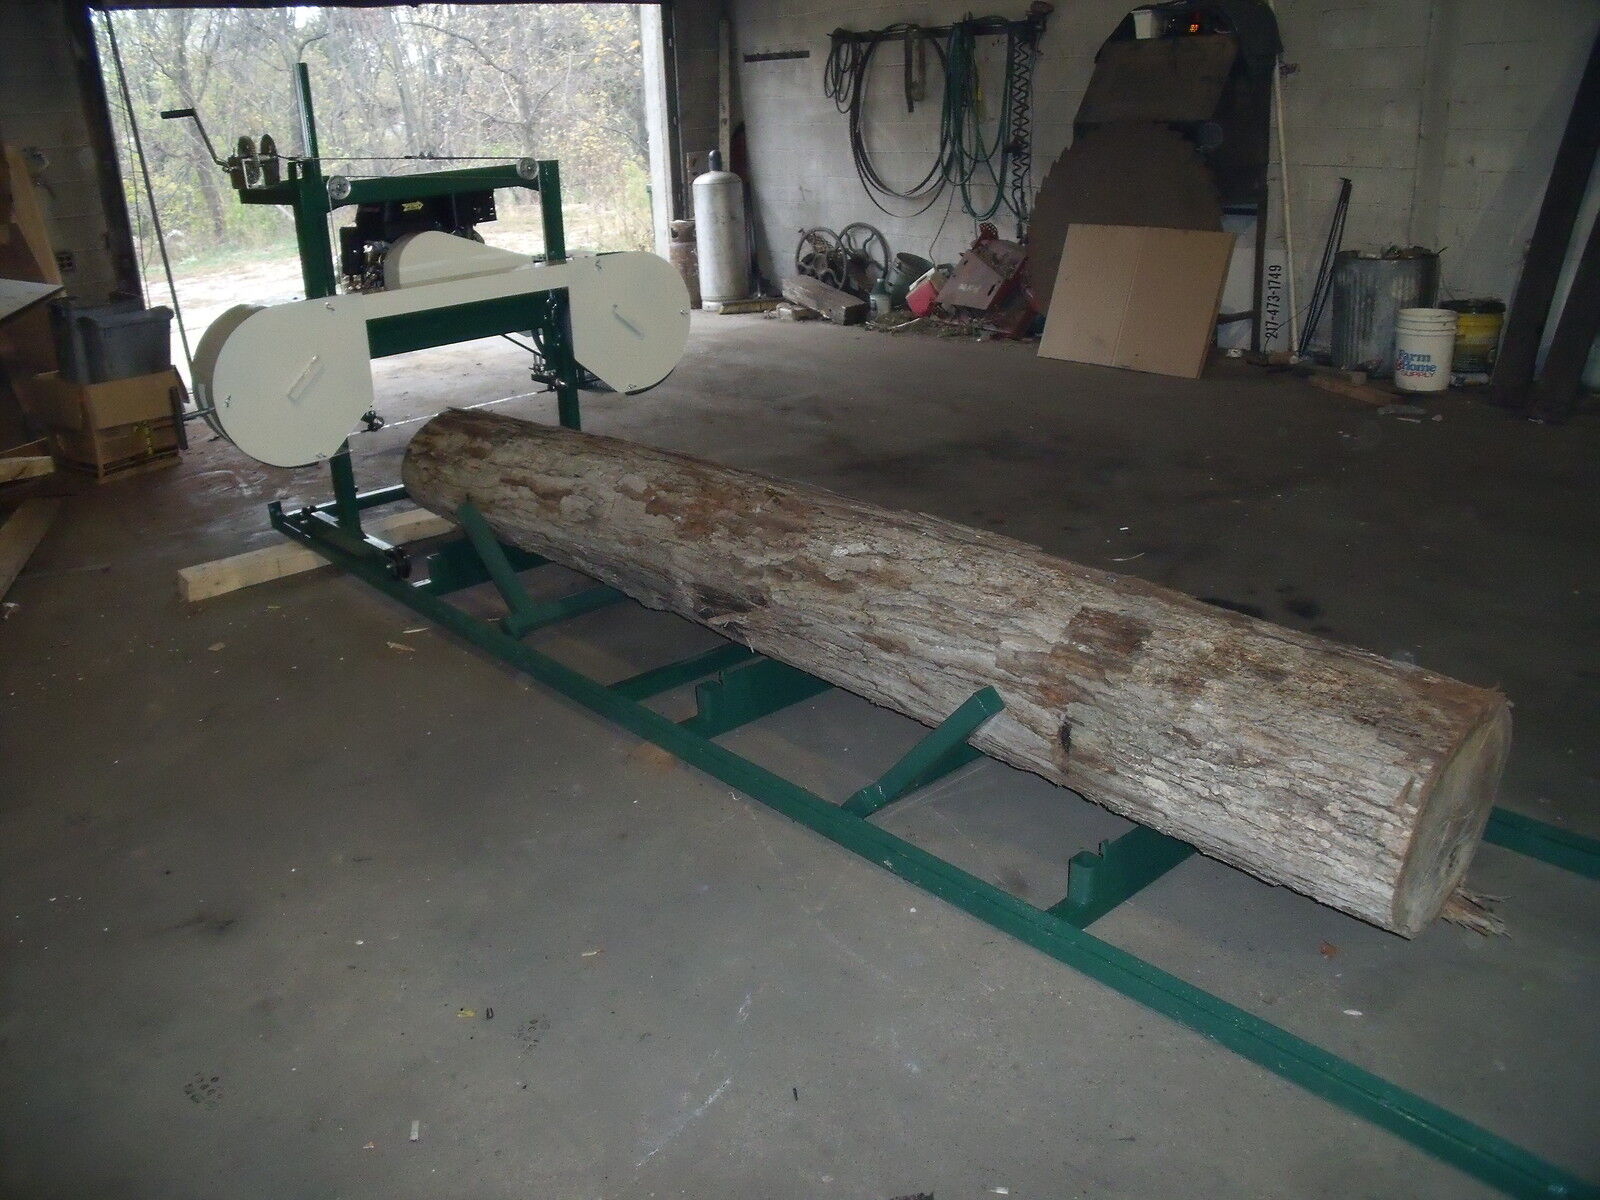 BAND SAWMILL PLANS BUILD IT YOURSELF COMPLETE  INSTRUCTIONS (VIEW VIDEO BELOW) 